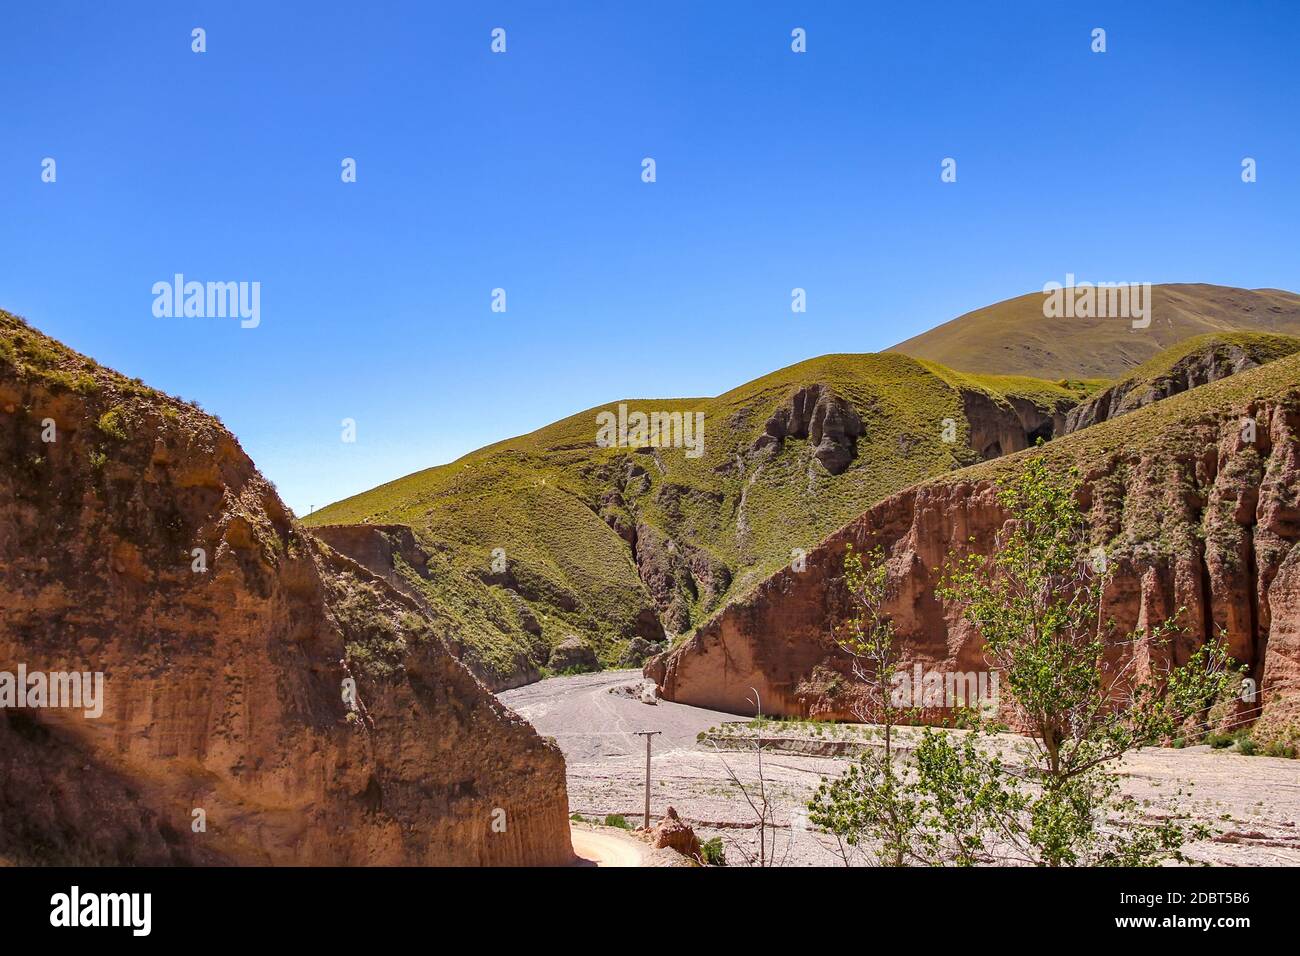 Landscape view of Iruya, Argentina, South America on a sunny day. Stock Photo